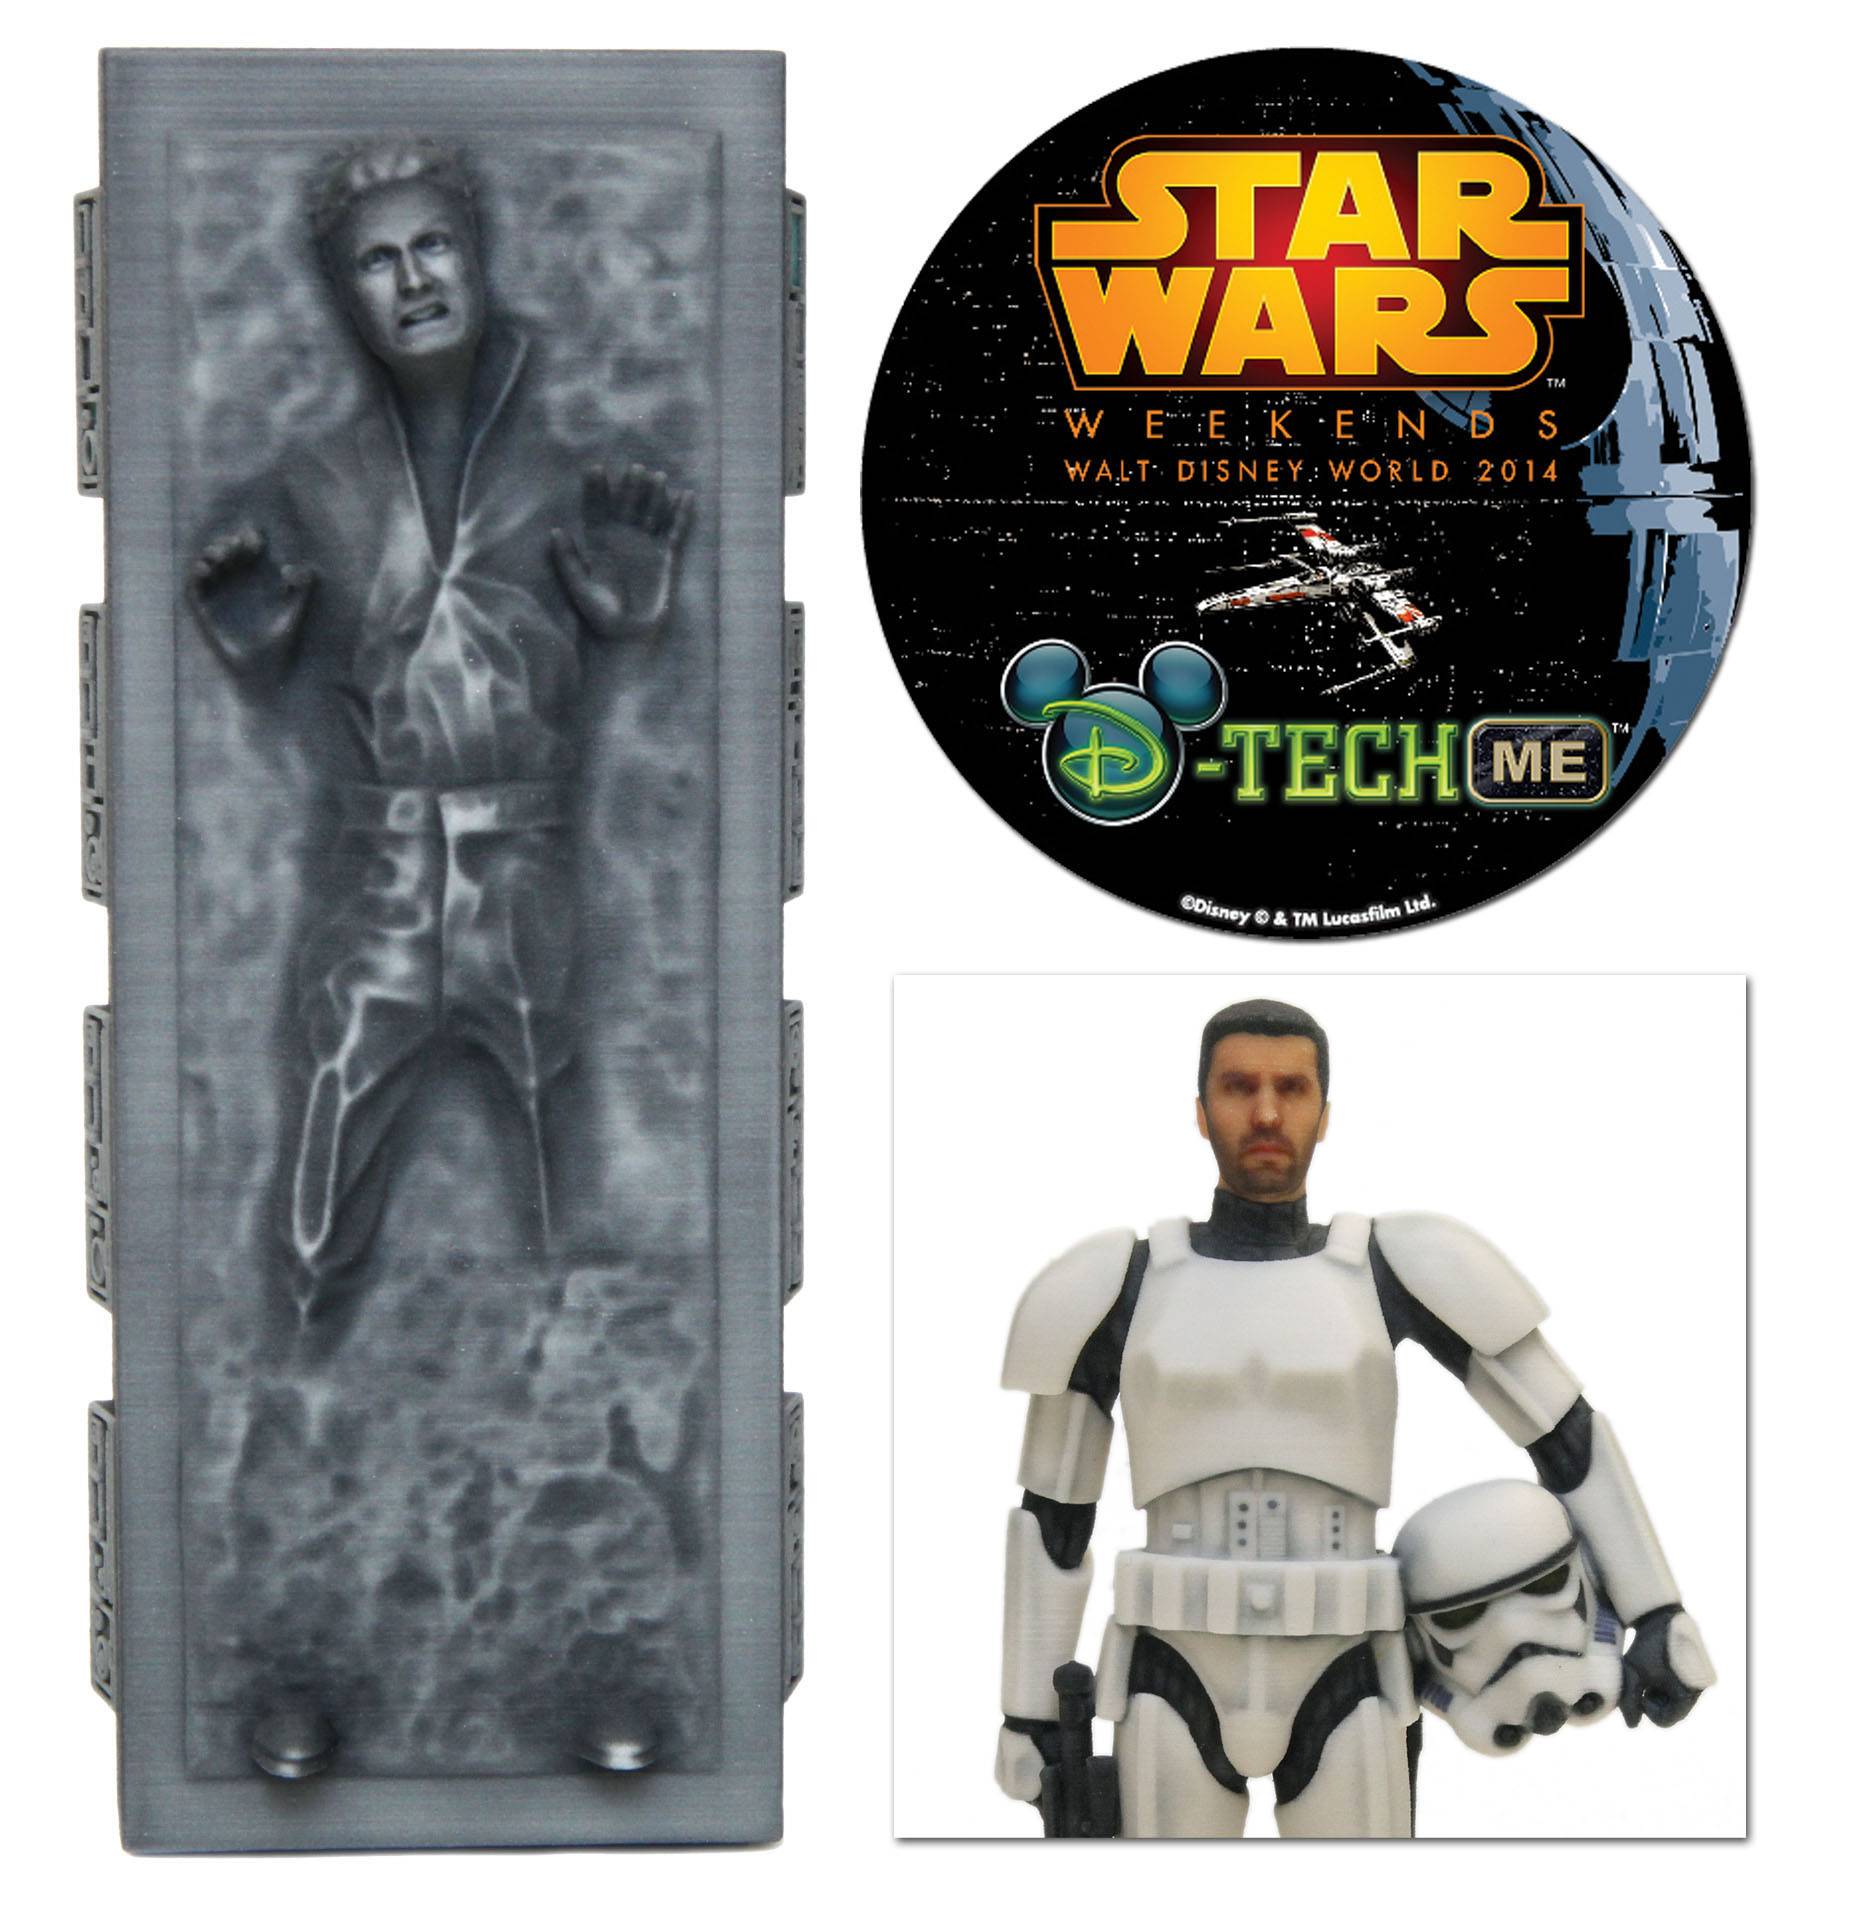 D-Tech Me returns to Star Wars Weekends 2014 with new figurines